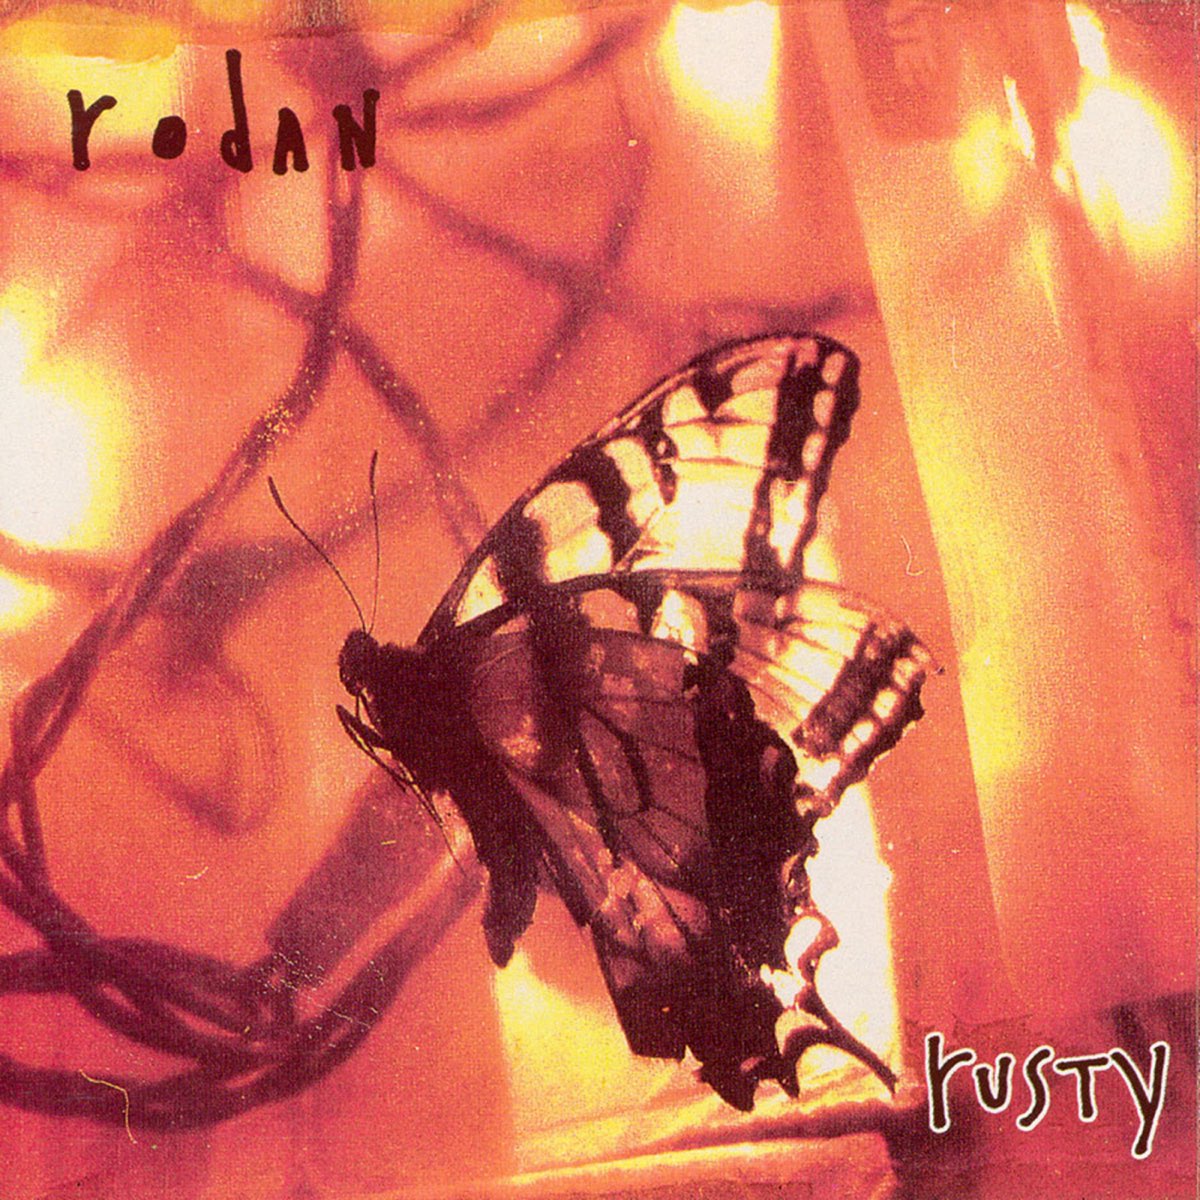 30 years ago today, #Rodan released “Rusty” (@touchandgorec). Still a shiner. Read our Q&A with the band’s late, great #JasonNoble: magnetmagazine.com/2010/11/15/qa-…